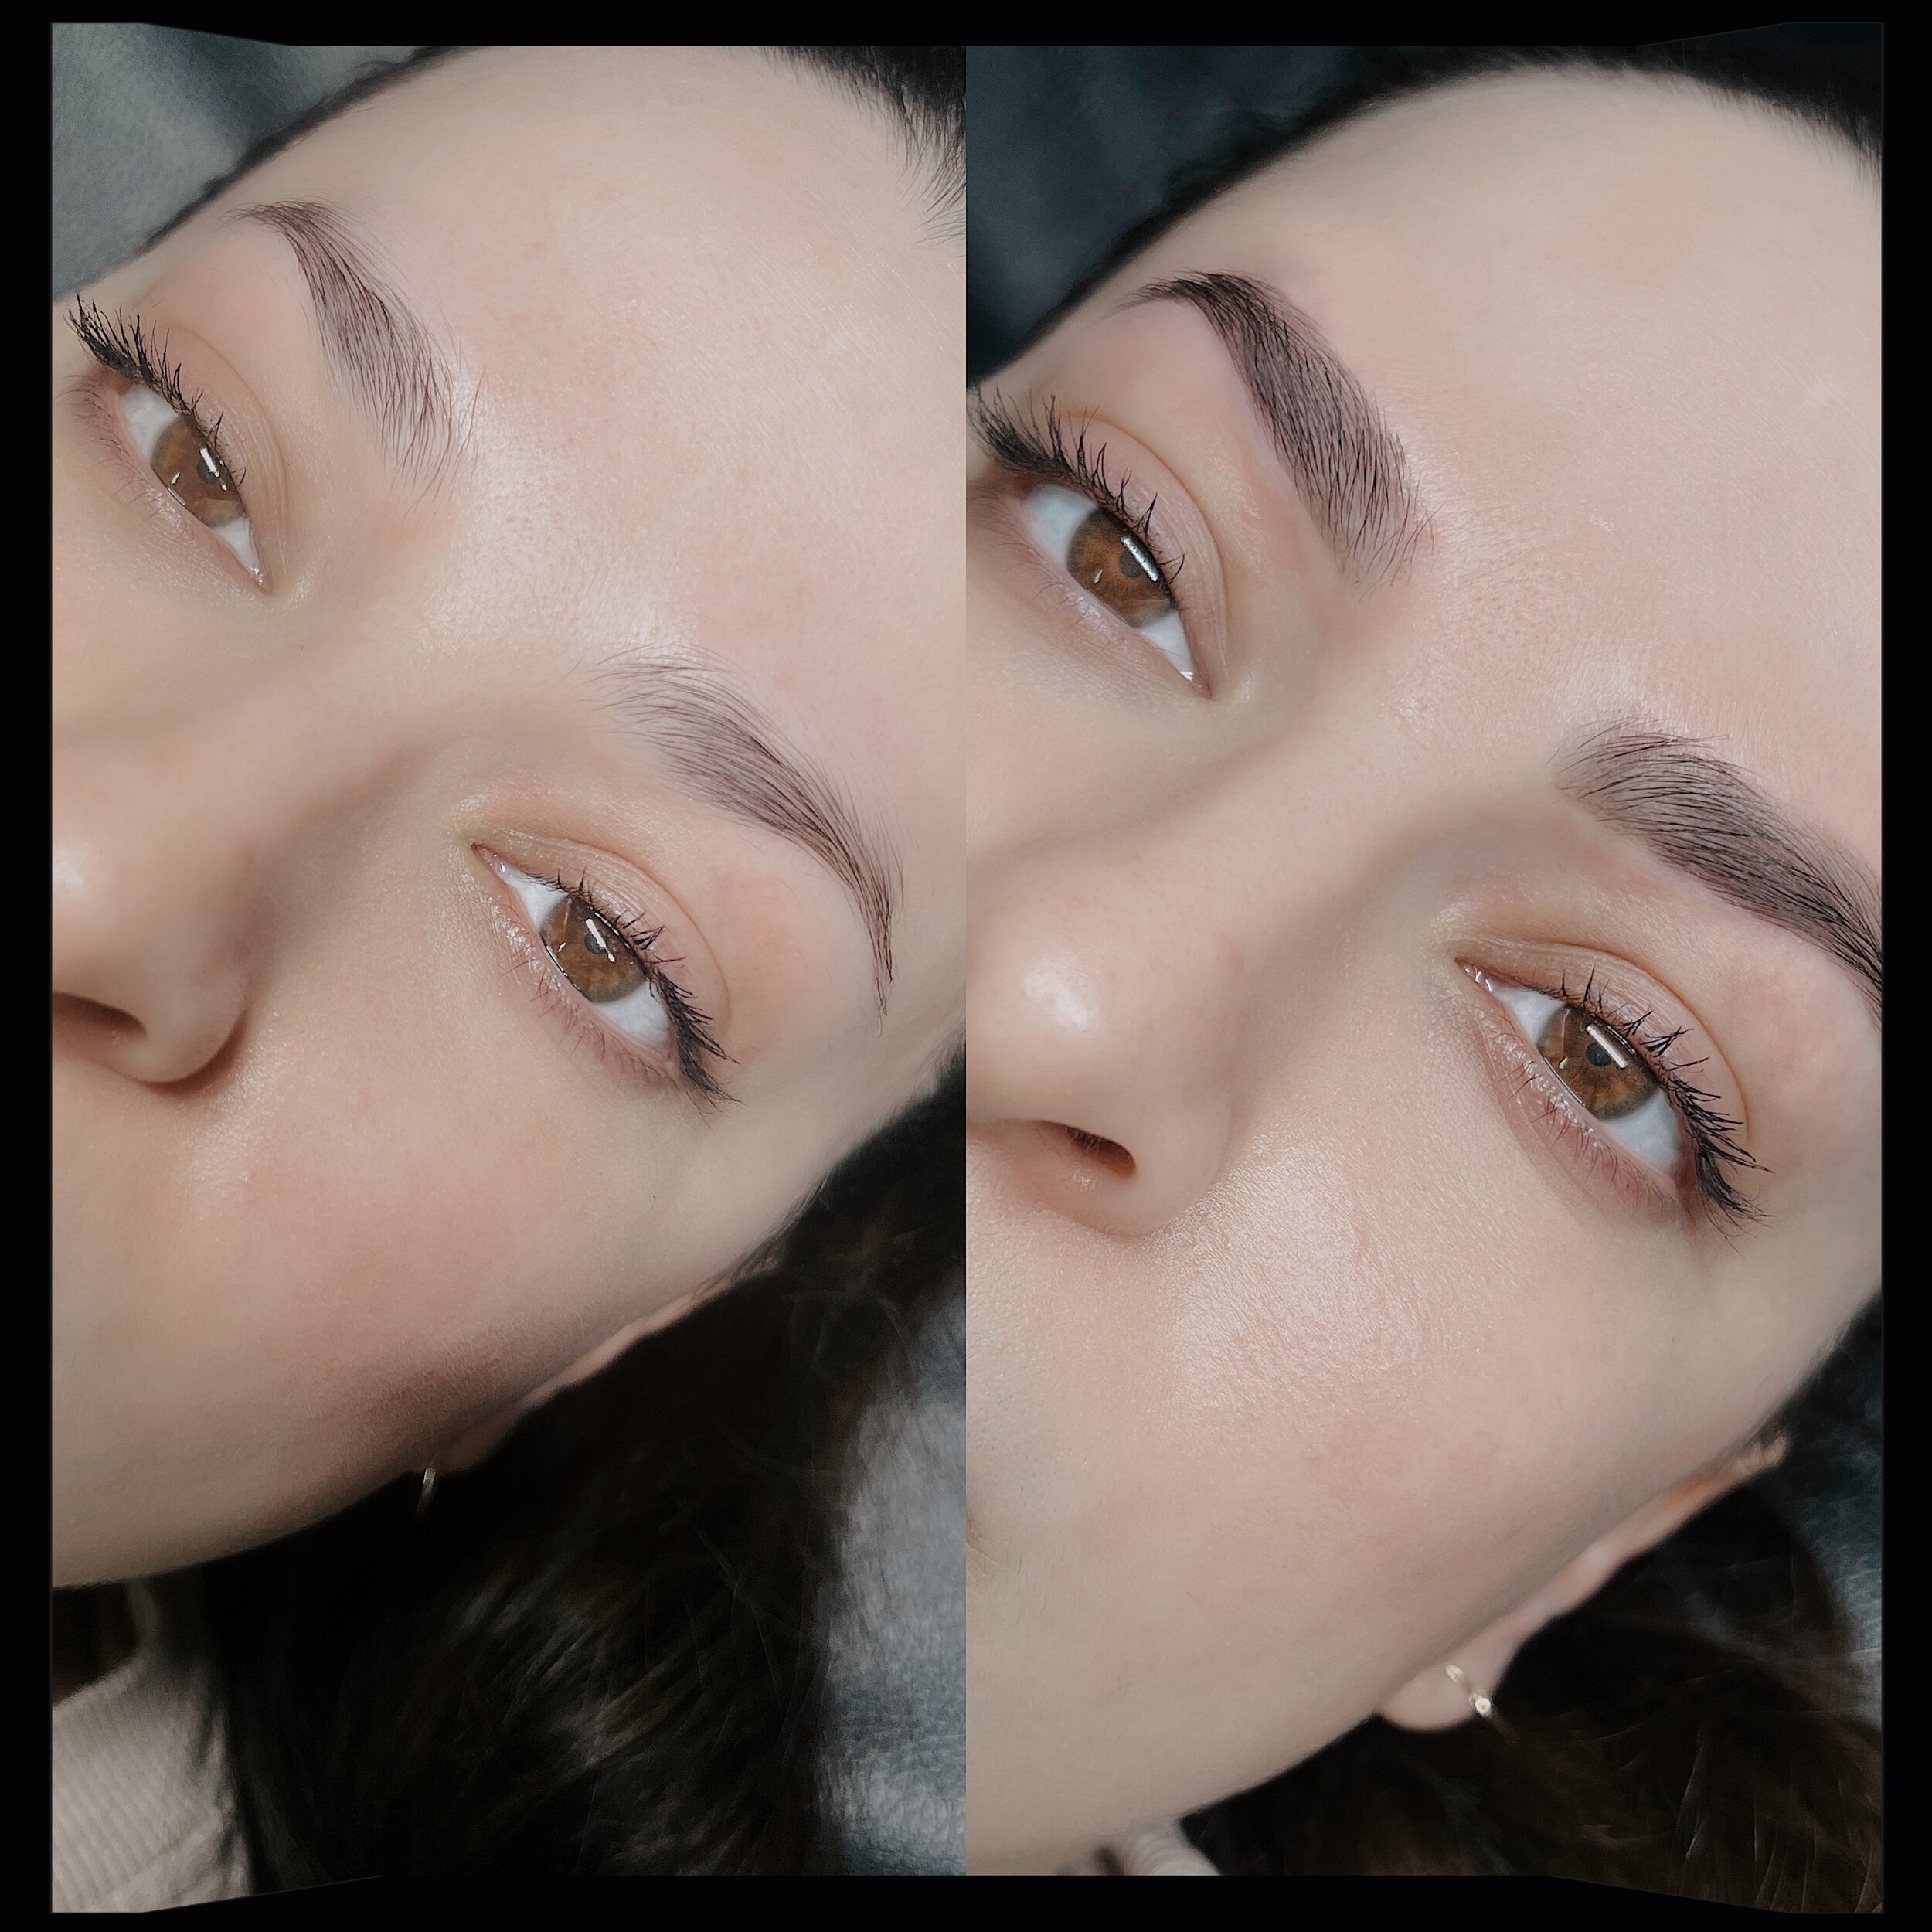 Bold brows, bold attitude ✨confidence can start with some good brows 😉

Brow wax and tint $35 
Can be booked by clicking on the link in my bio! 

Want it done for a special occasion? I got you! Want to keep up brow maintenance then come in every 4-6